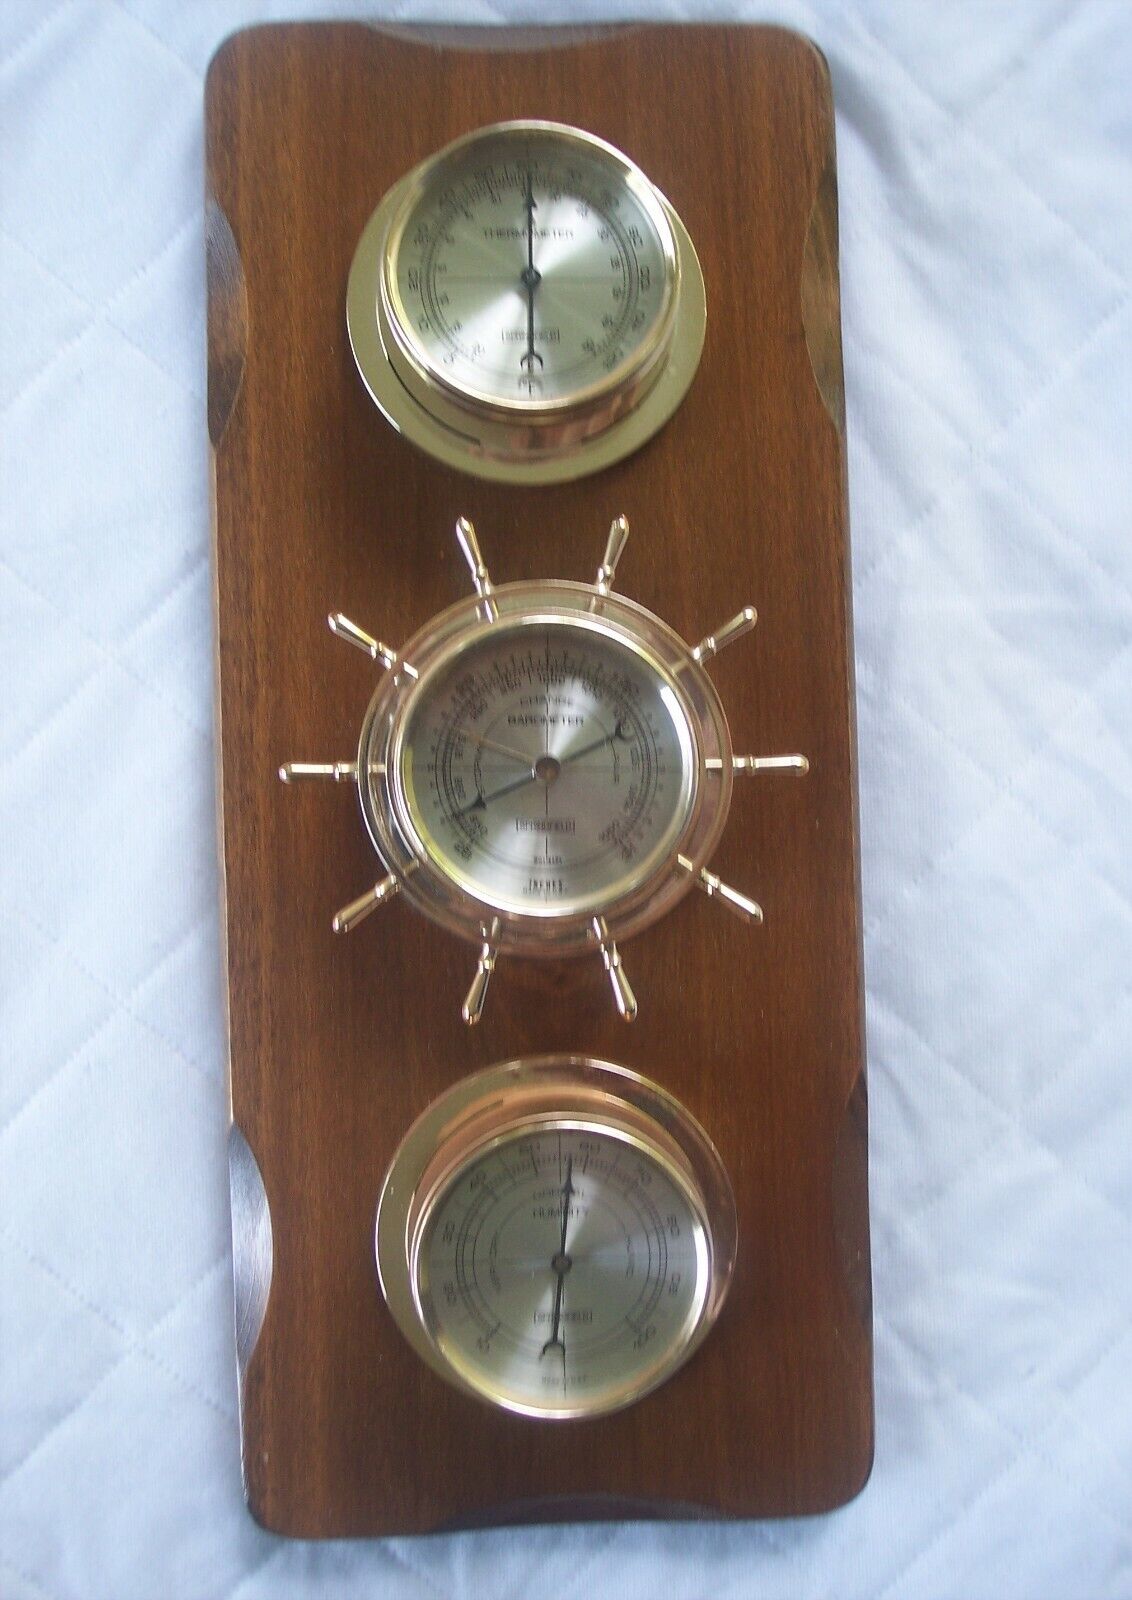 Vintage Springfield Weather Station Thermometer Barometer Humidity - Nautical